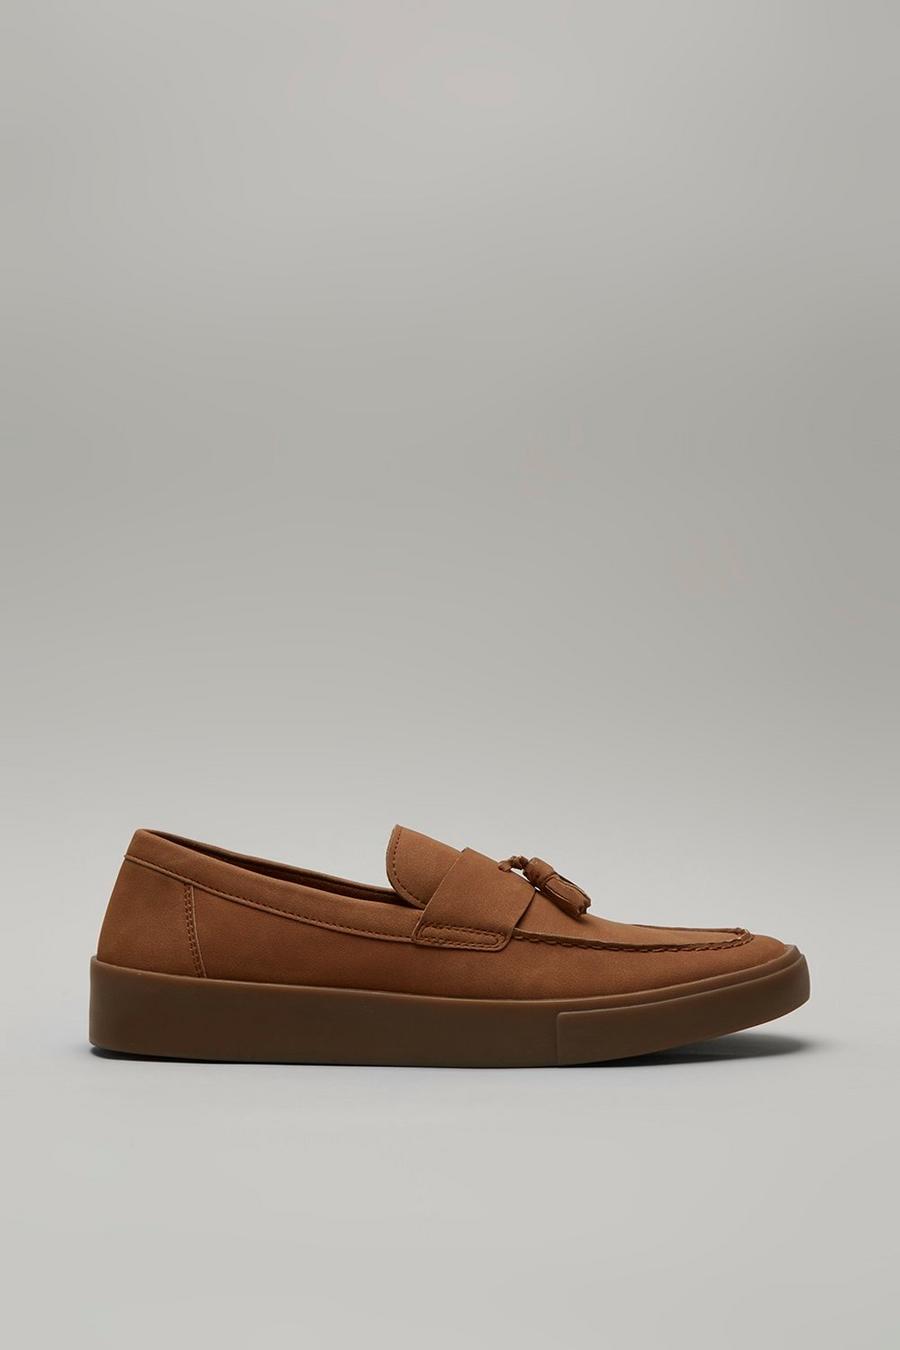 Tan Slip On Shoes With Tassels